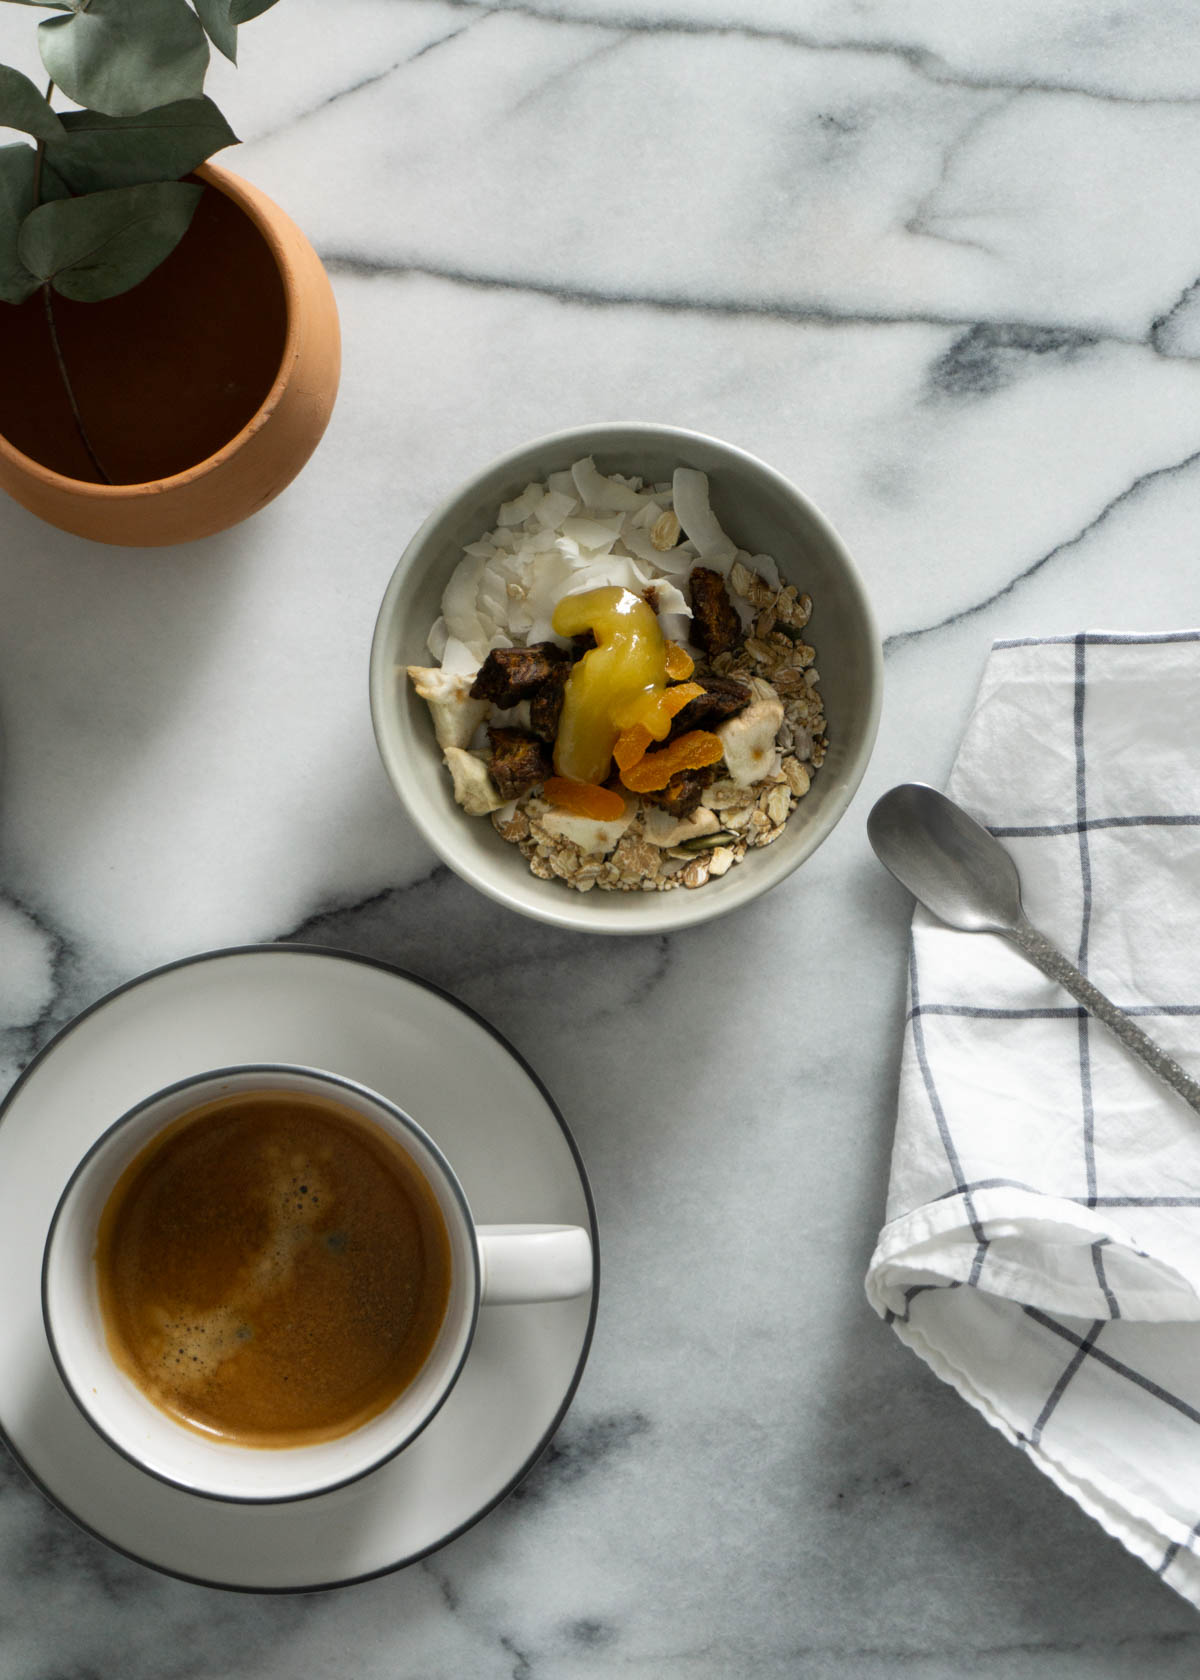 https://www.rgdaily.com/wp-content/uploads/2019/03/scandinavian-table-setting-marble-breakfast-coffee-interior-design-rg-daily-rgdaily-1.jpg